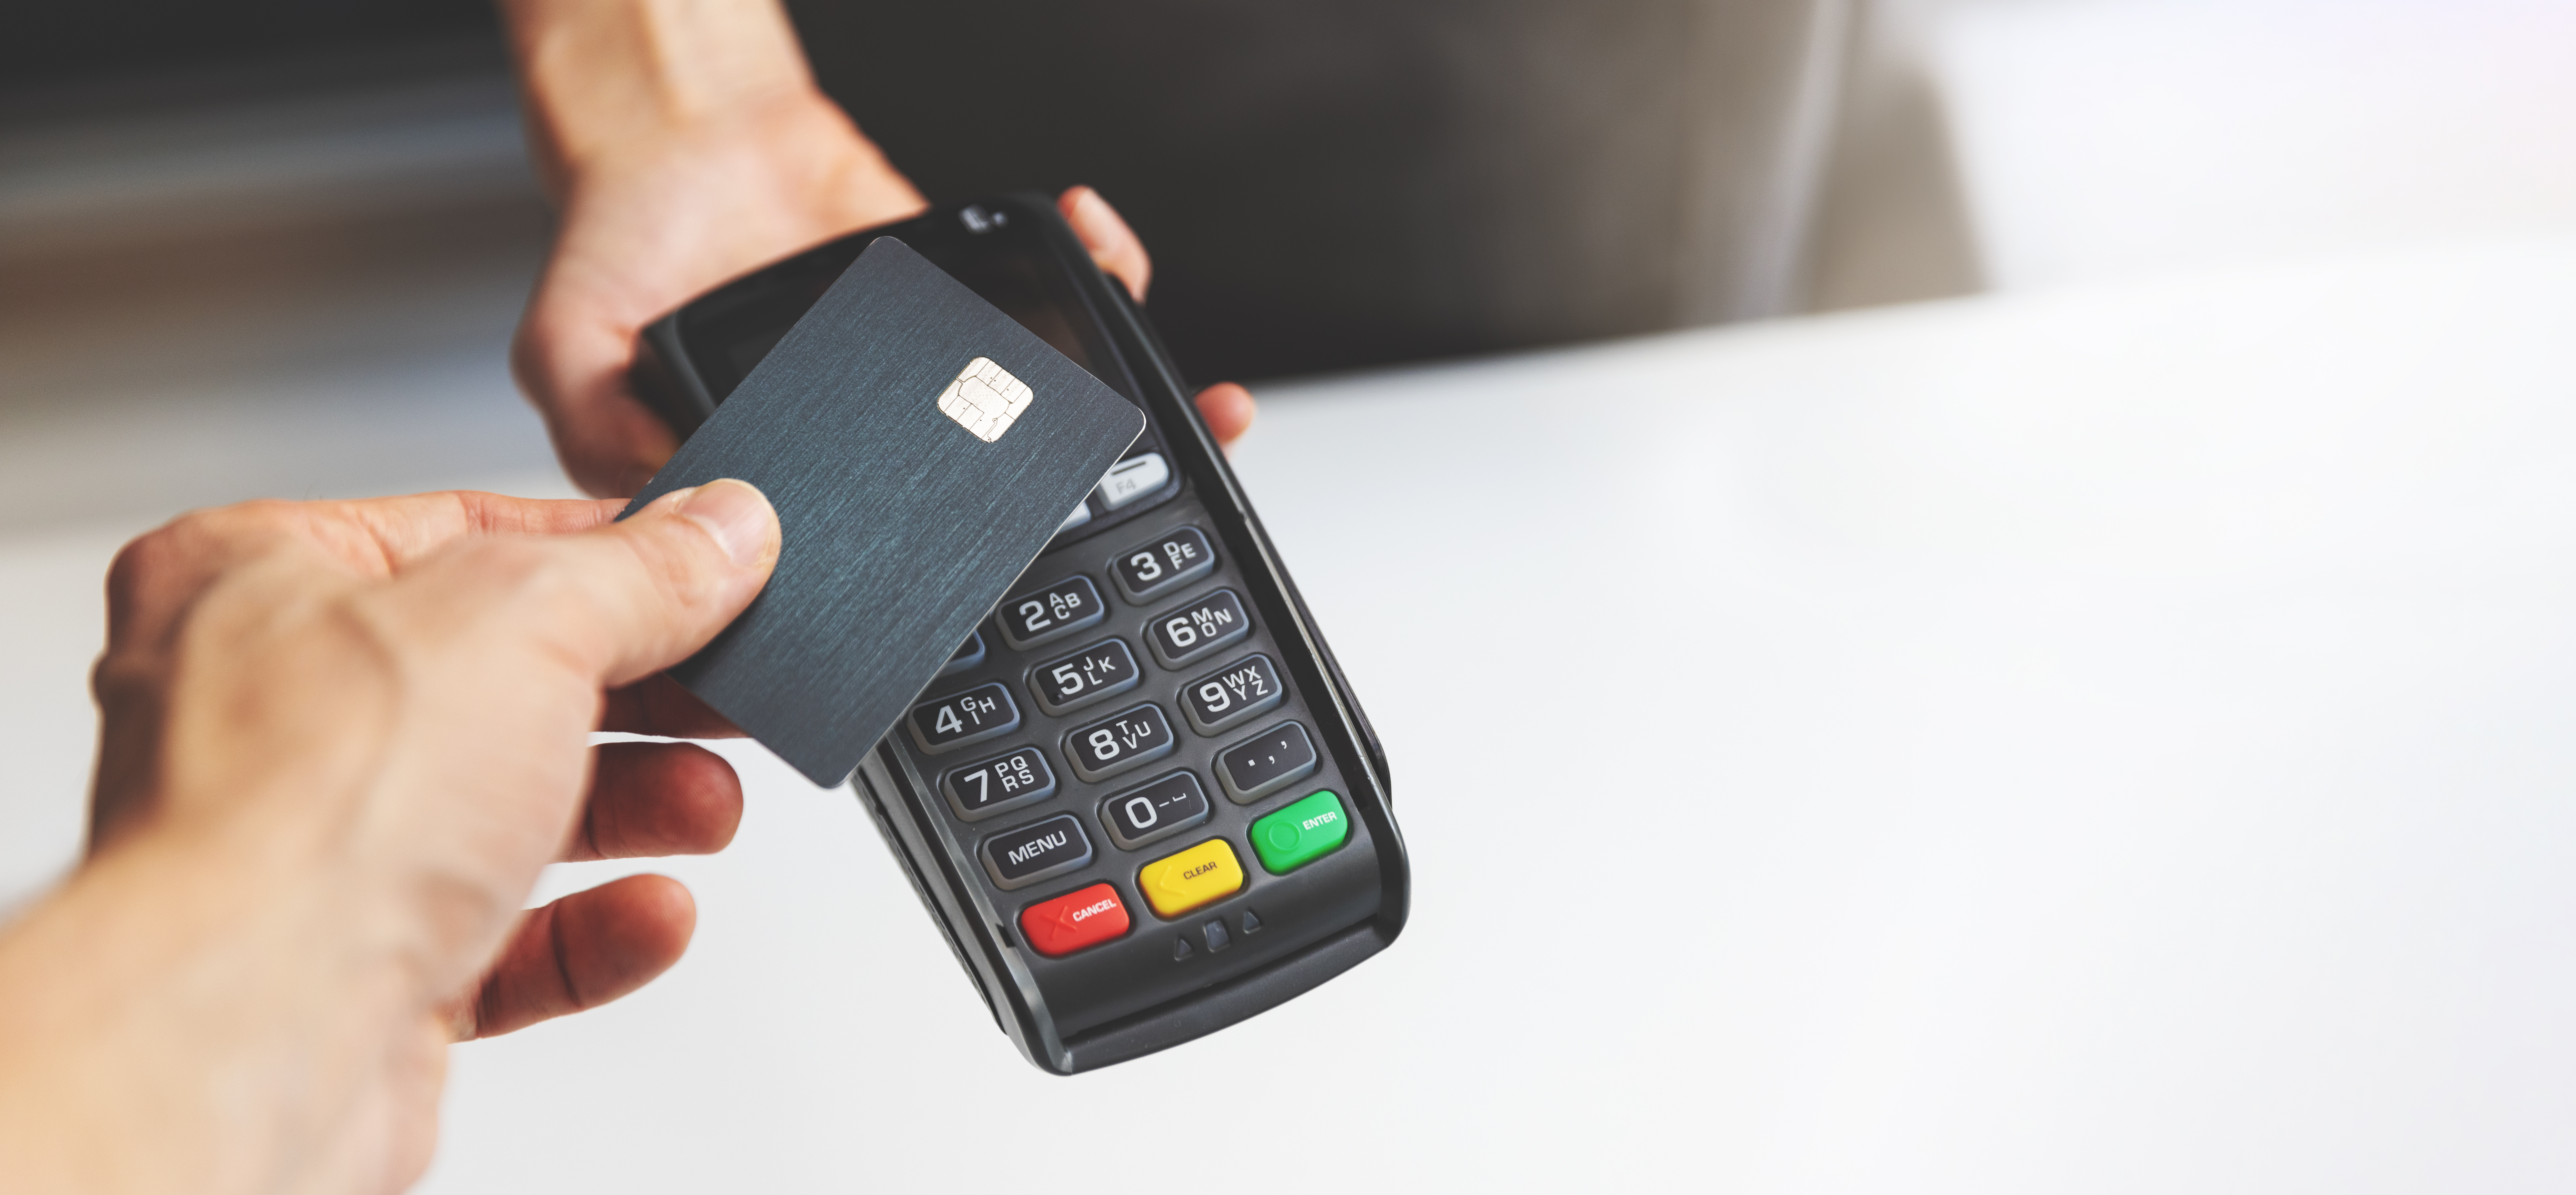 Card Payments and Initial Obligations: Why it pays to use your card